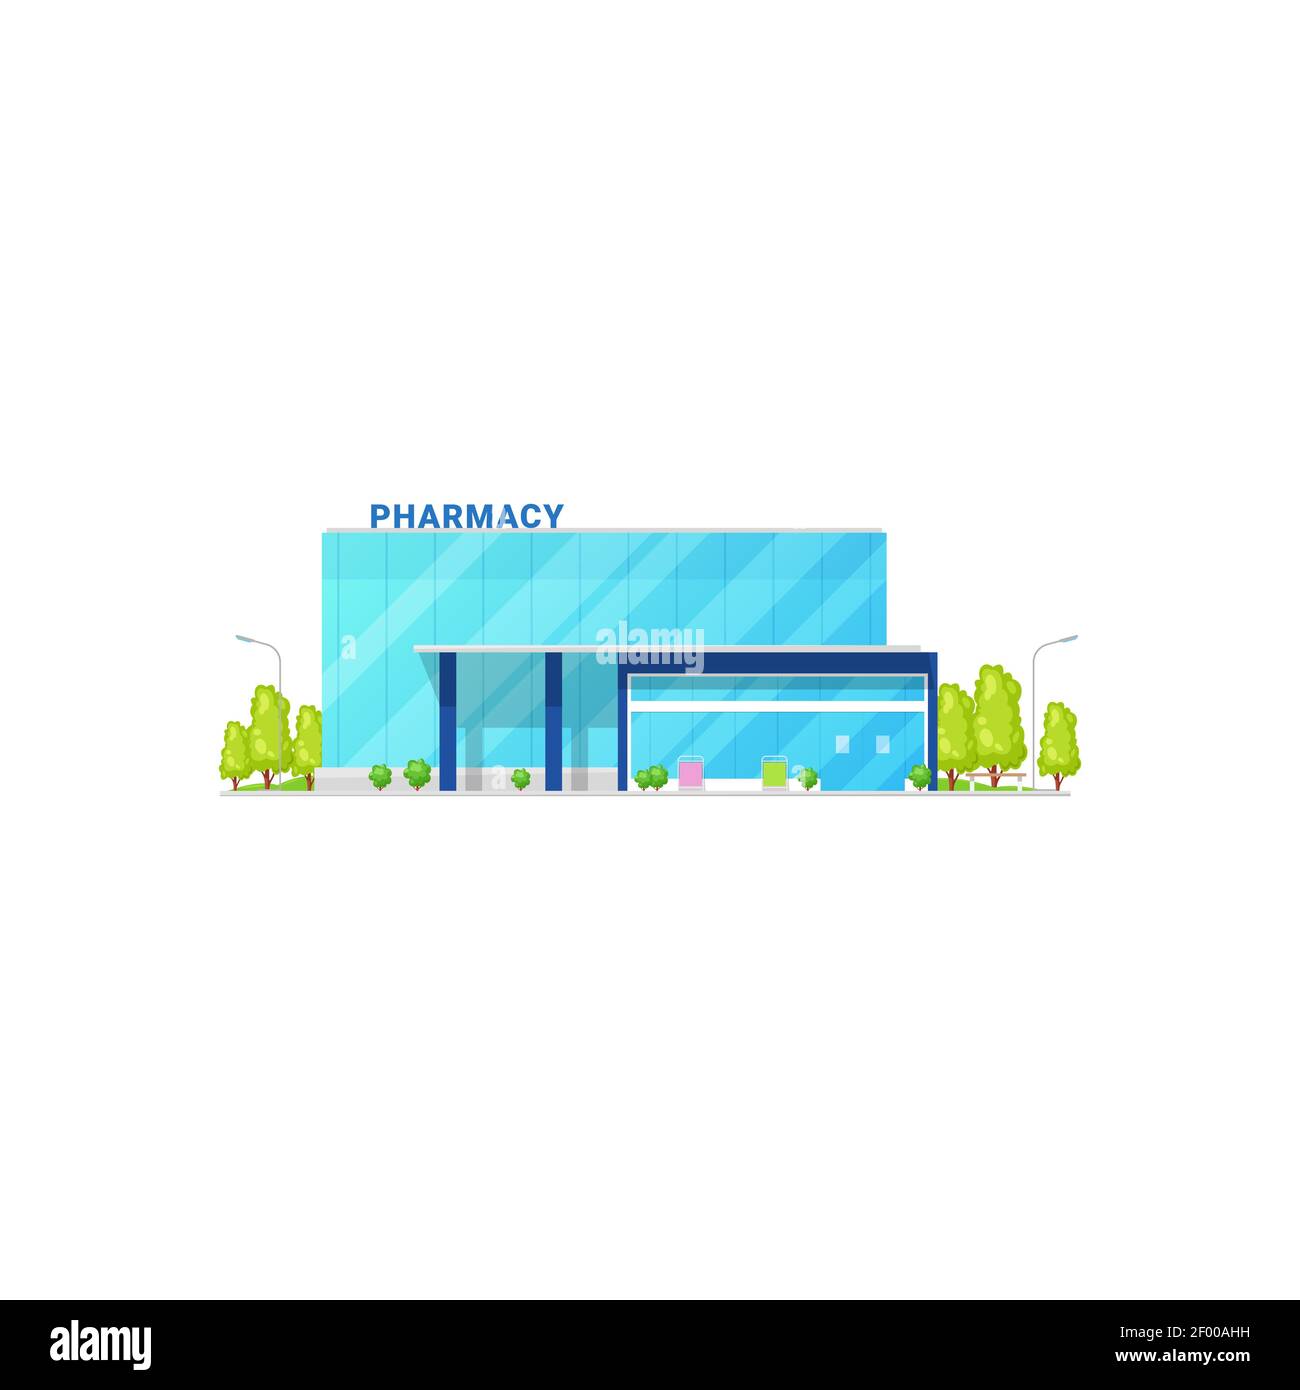 Pharmacy building isolated drugstore facade icon. Vector exterior of medical shop selling medications, storefront with street lamps and trees. Drug st Stock Vector